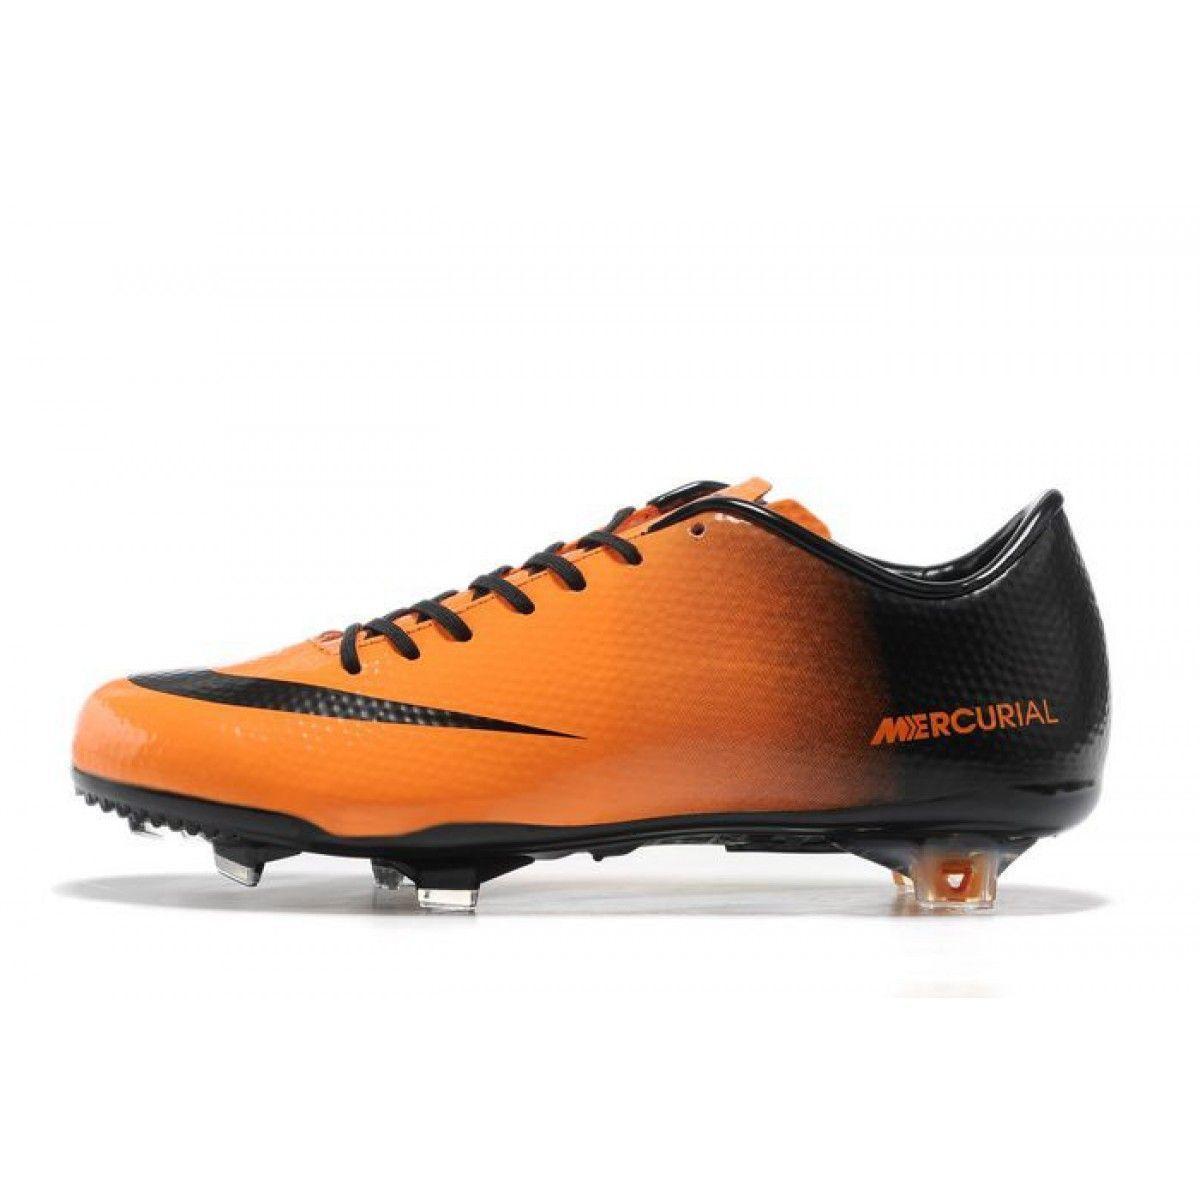 Trends For > New Nike Soccer Shoes 2015